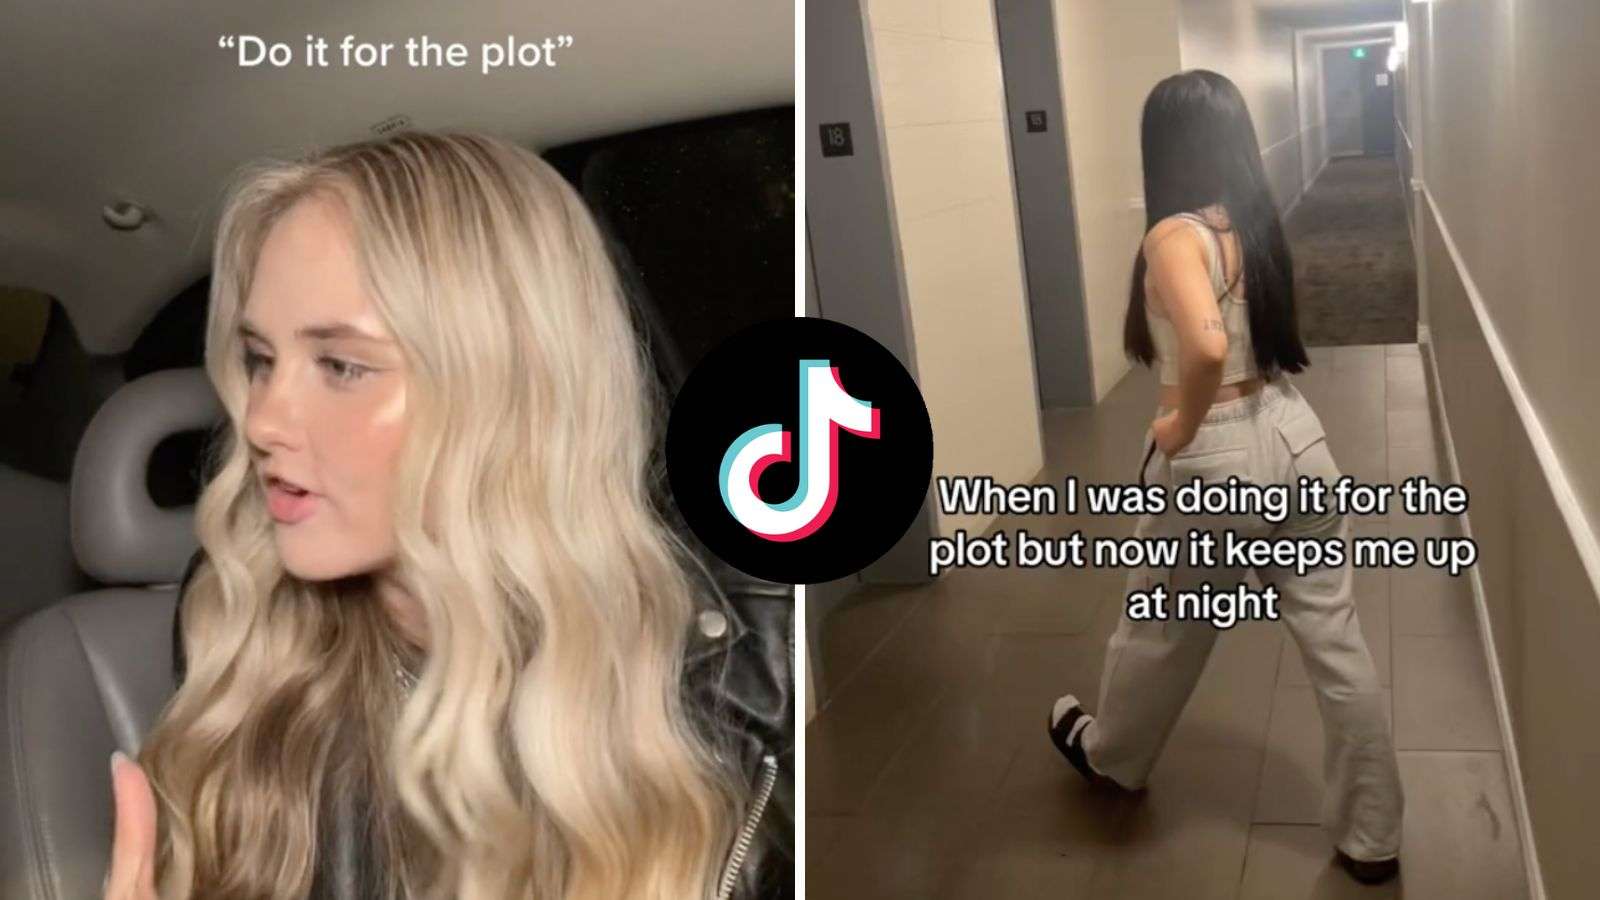 What does ‘do it for the plot’ mean on TikTok?